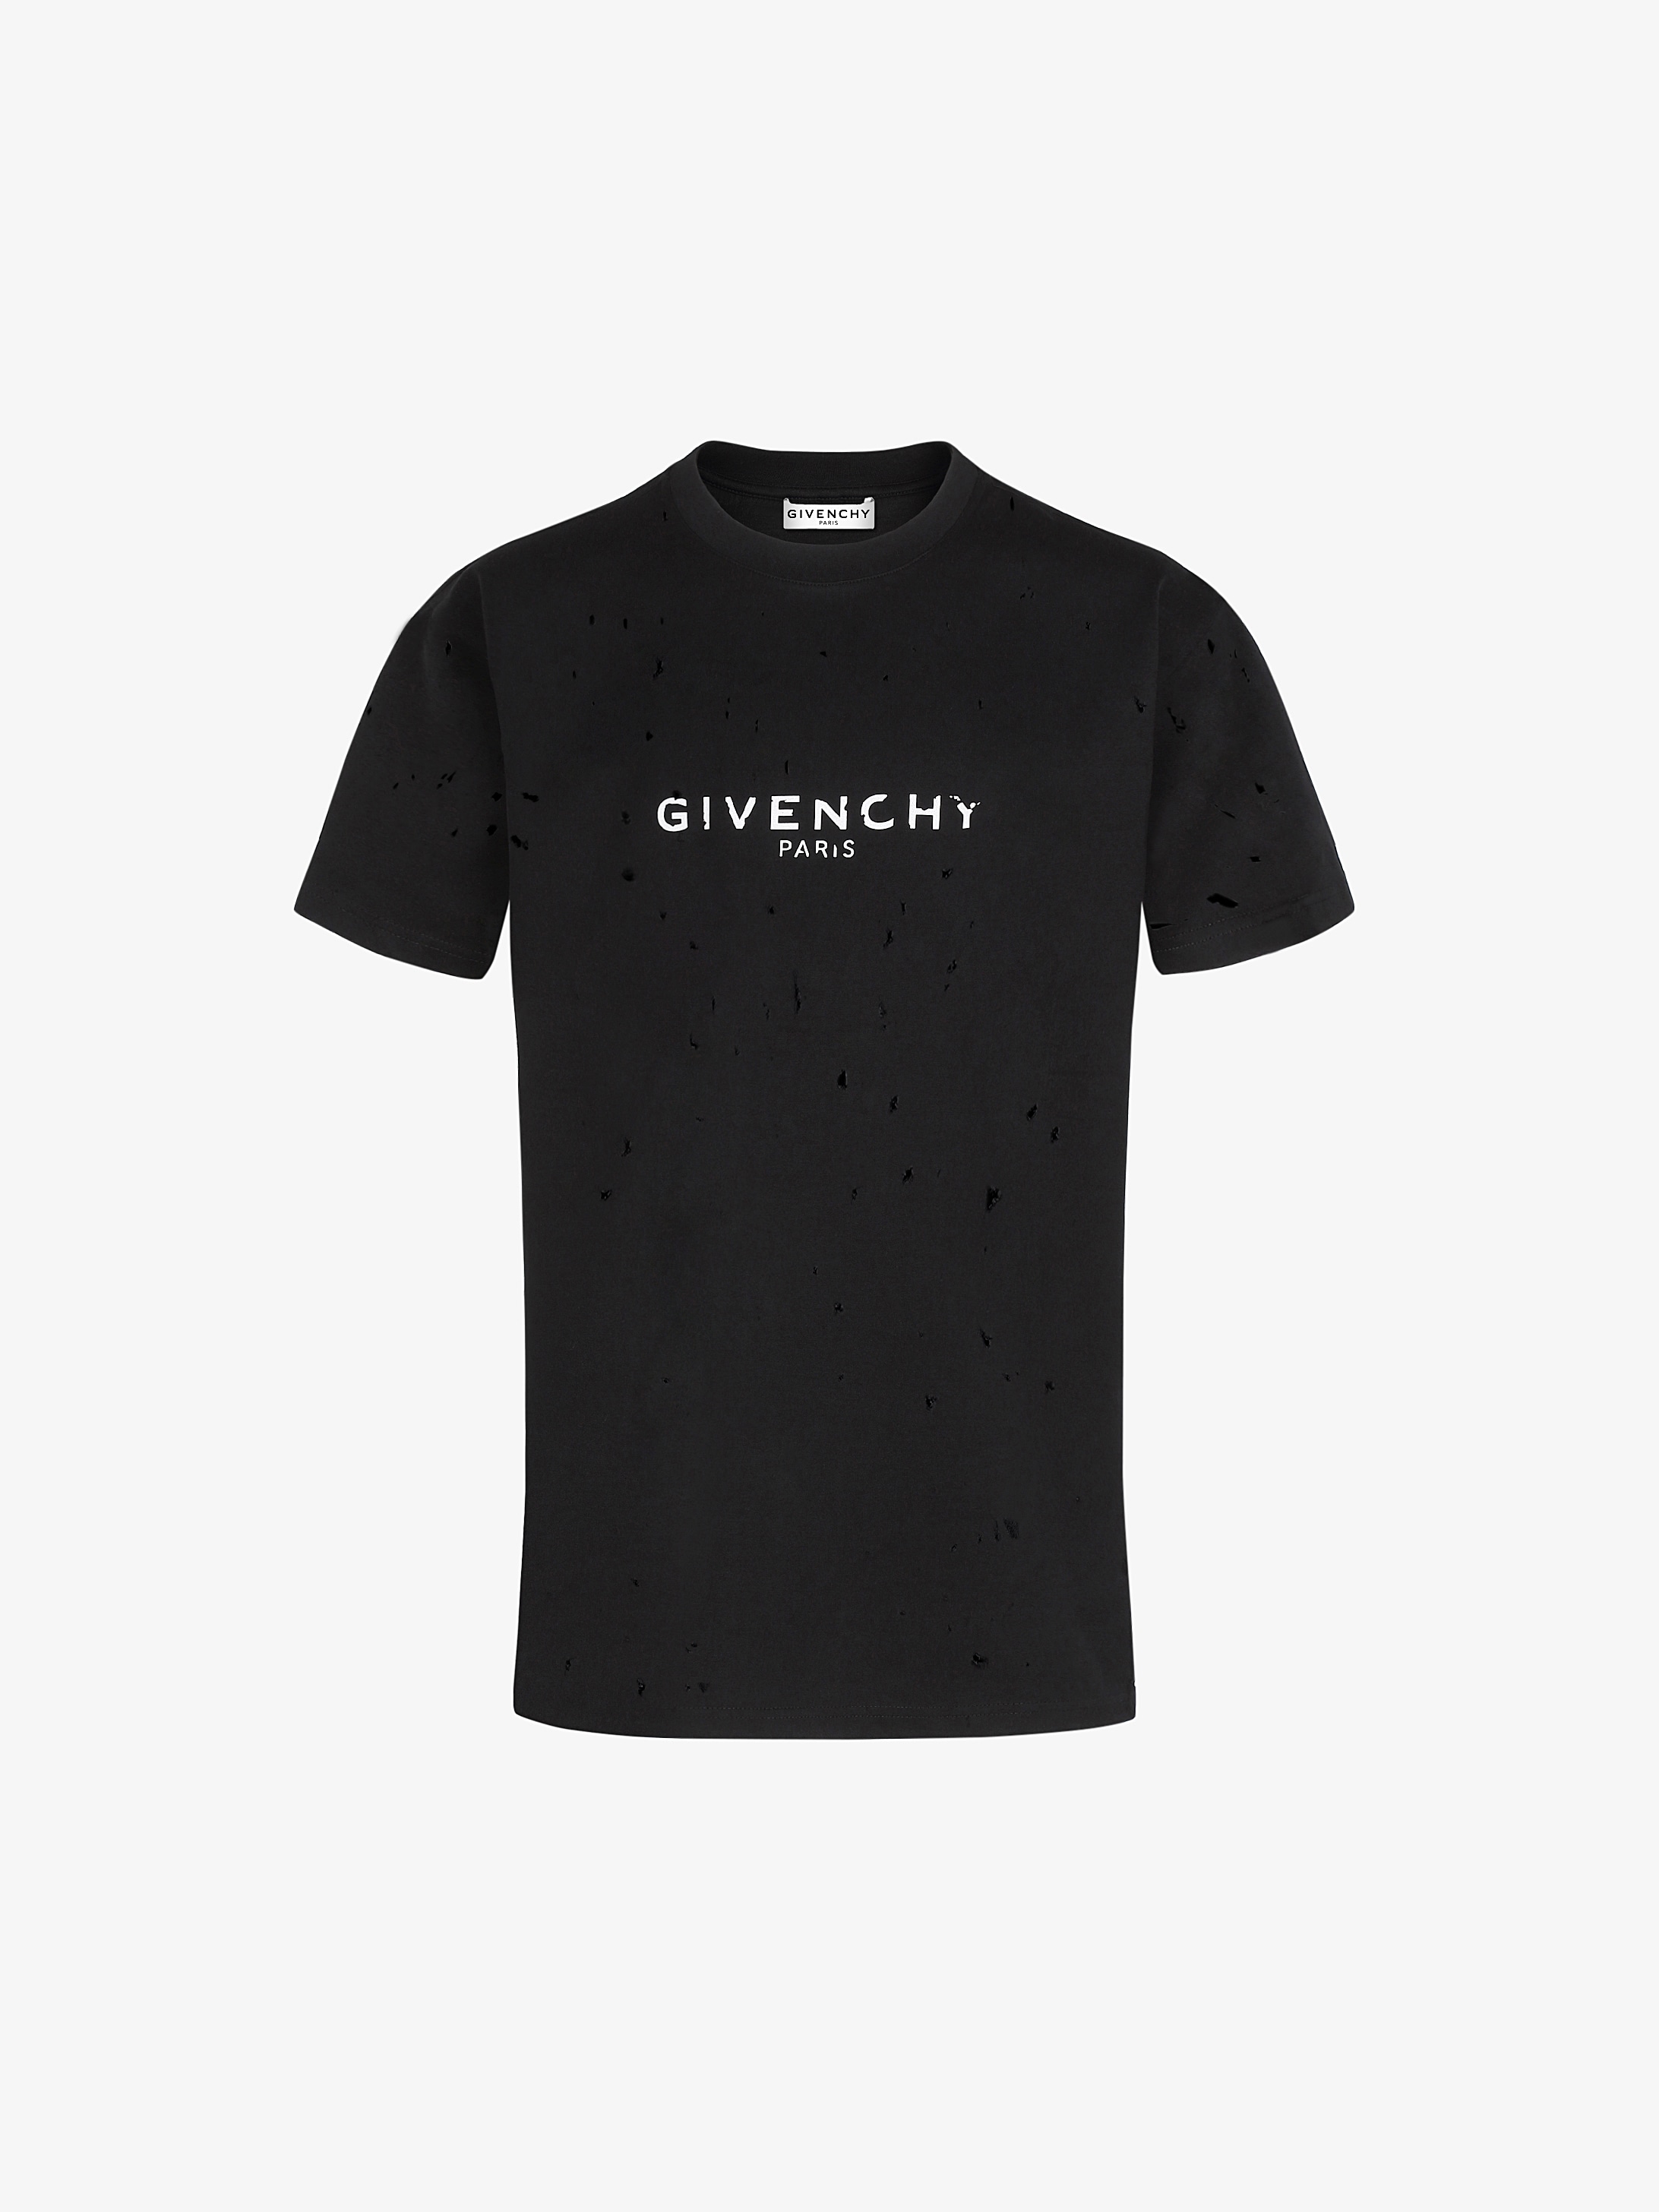 givenchy destroyed tee